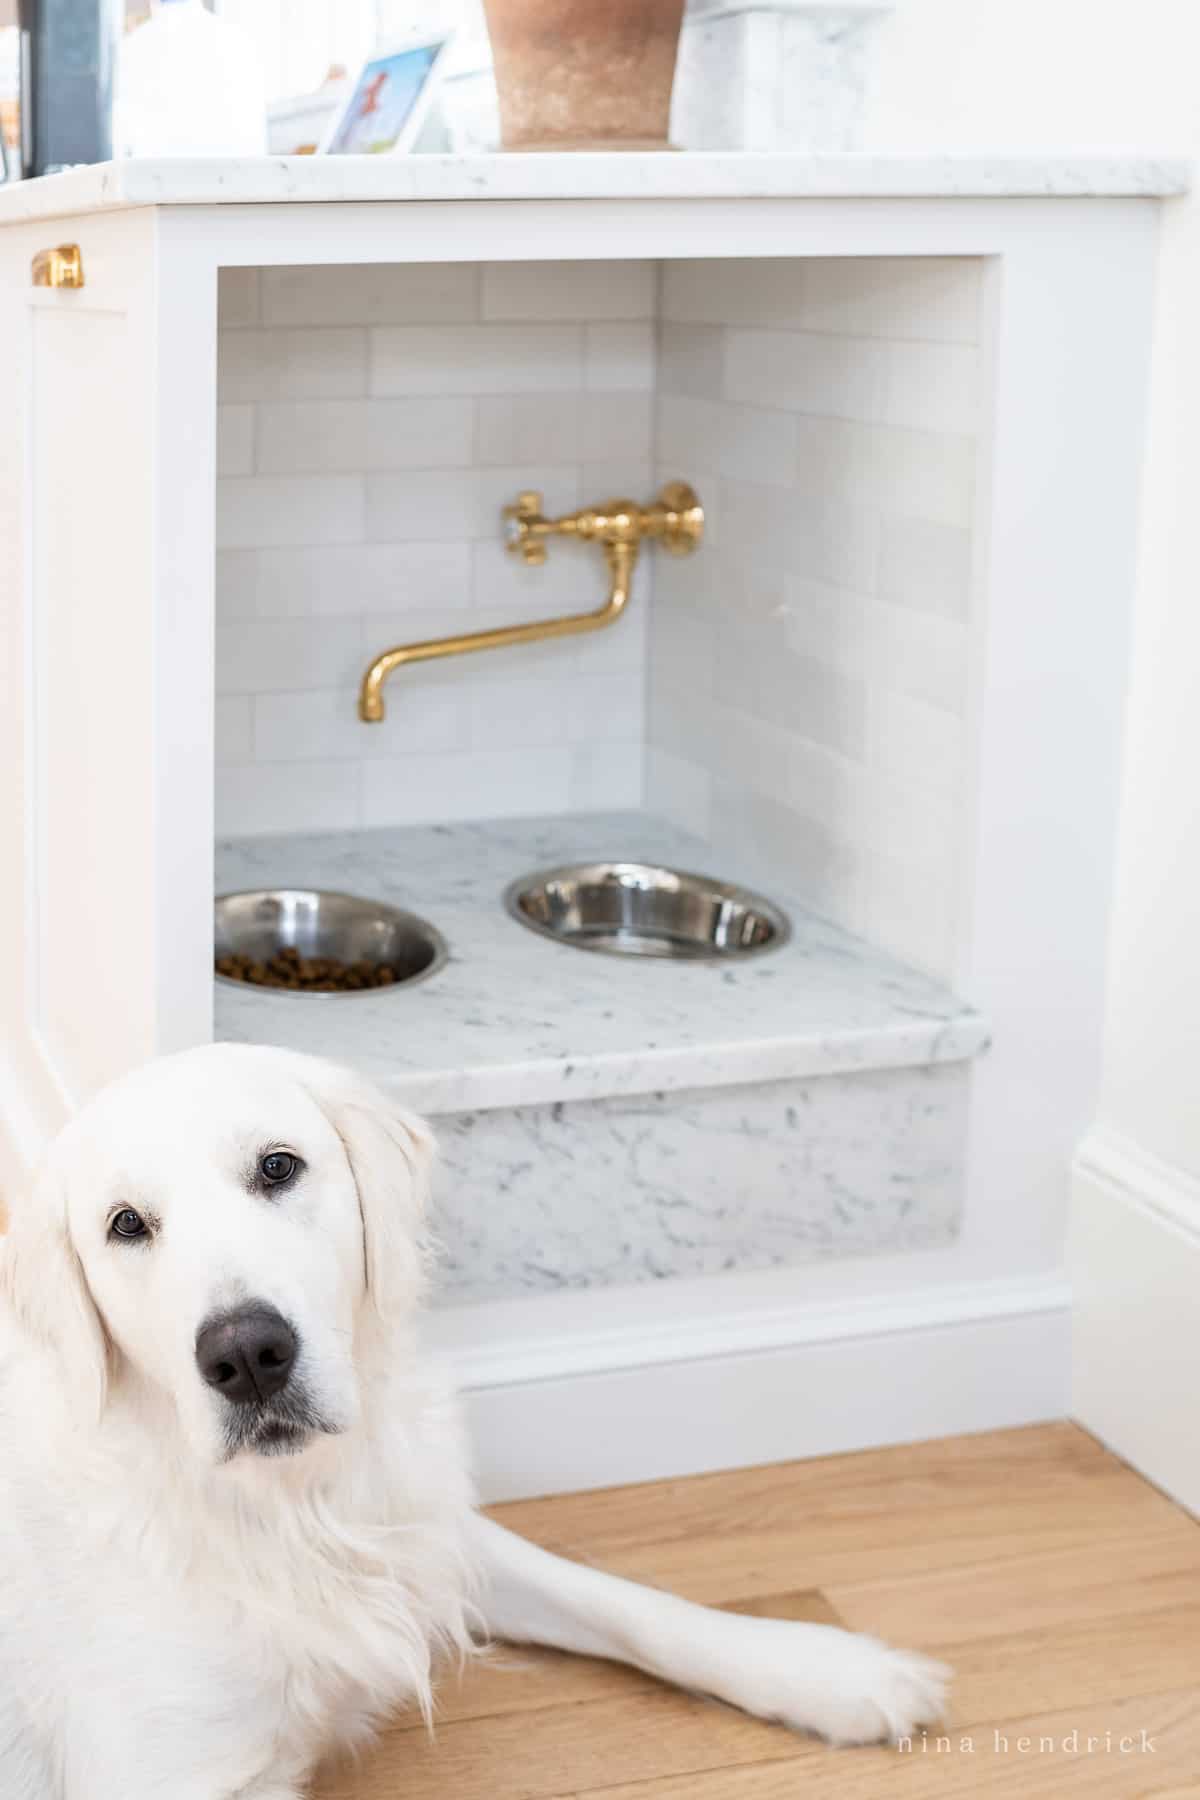 Built-in dog food and water station with a golden retriever.